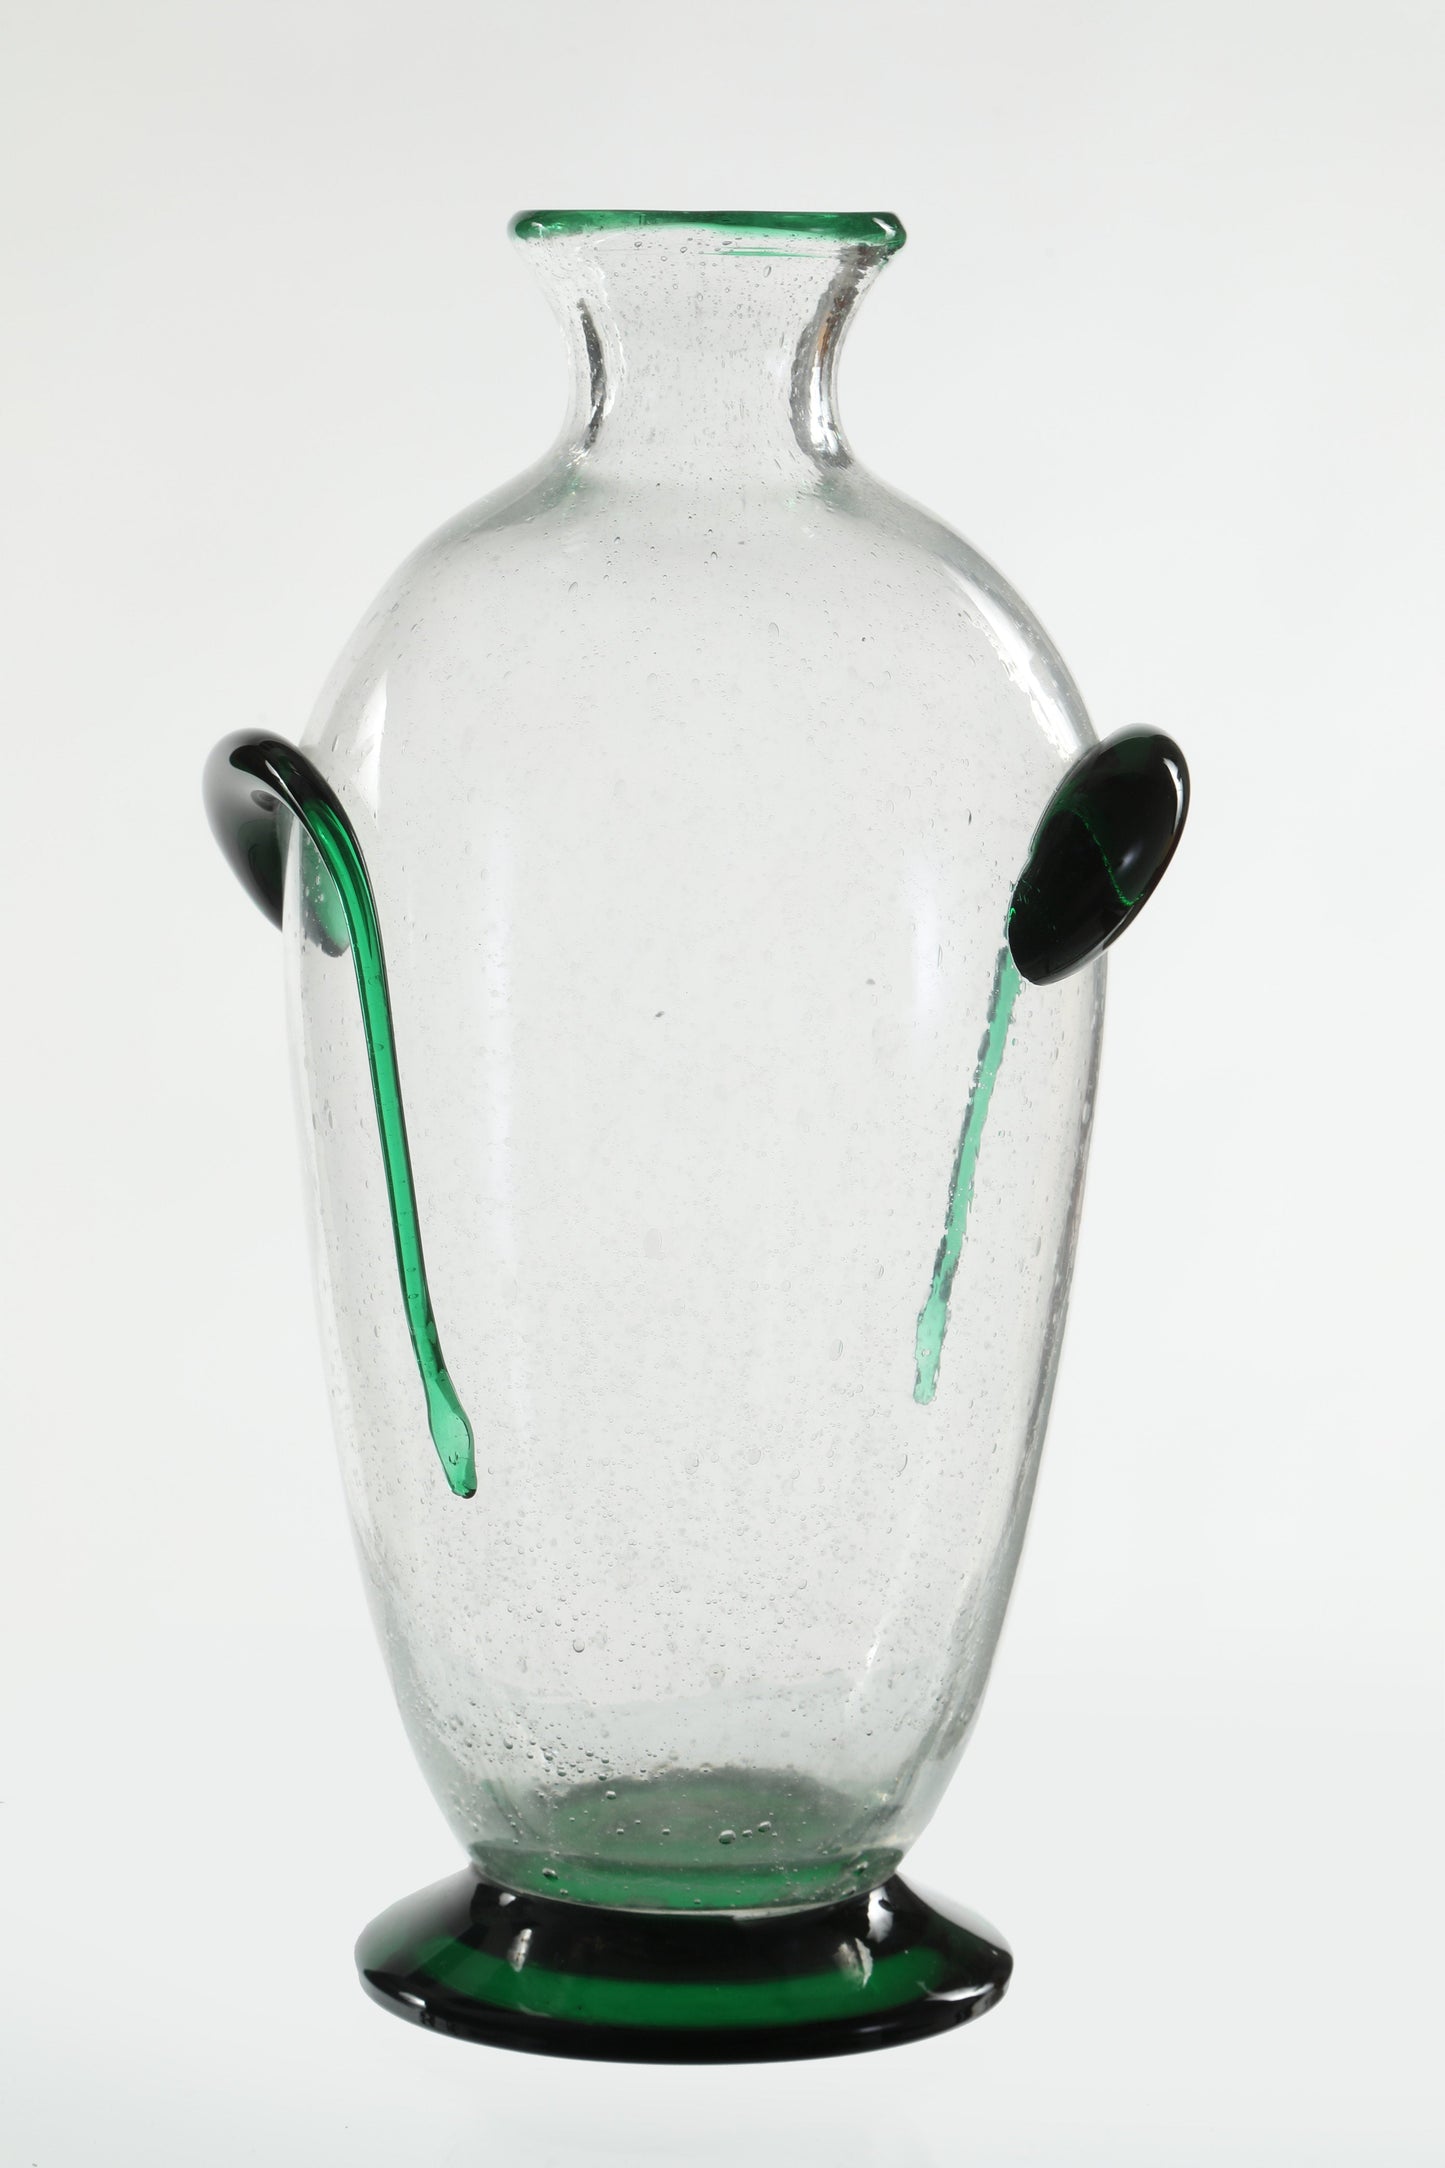 Bullicante glass vase with green bands